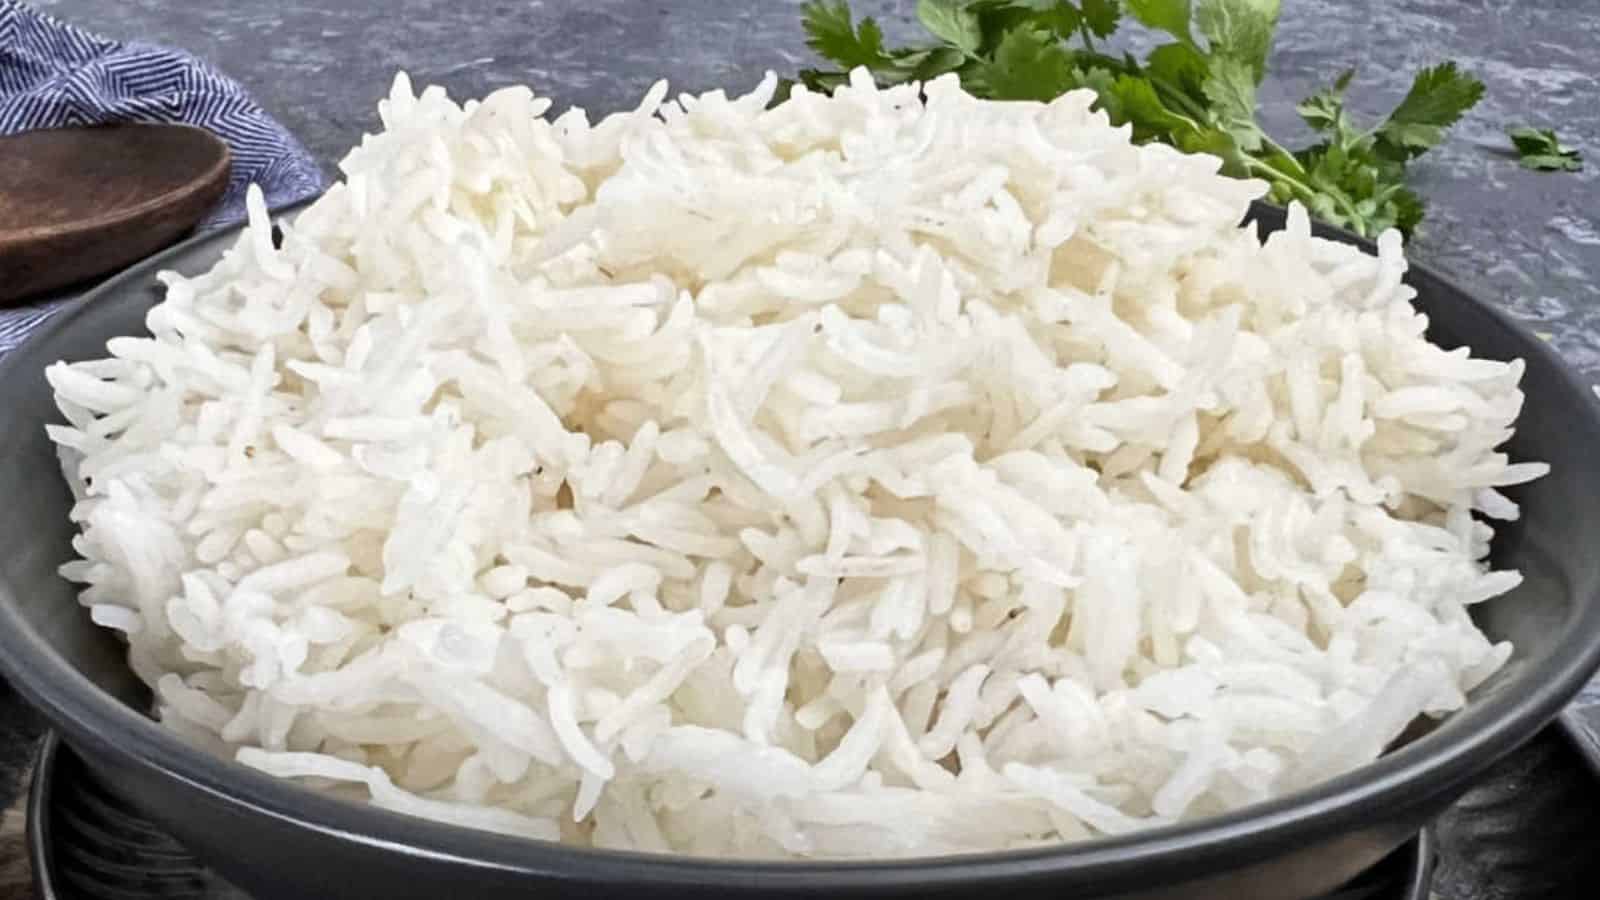 <p>You may not expect it, but even simple Basmati Rice can be underrated! When it's cooked just right, fluffy and fragrant, it's an unforgettable side dish. Recipes like Basmati Rice will remind you how awesome and underrated Indian dishes can be with their simplicity.<br><strong>Get the Recipe: </strong><a href="https://easyindiancookbook.com/basmati-rice/?utm_source=msn&utm_medium=page&utm_campaign=msn">Basmati Rice</a></p>